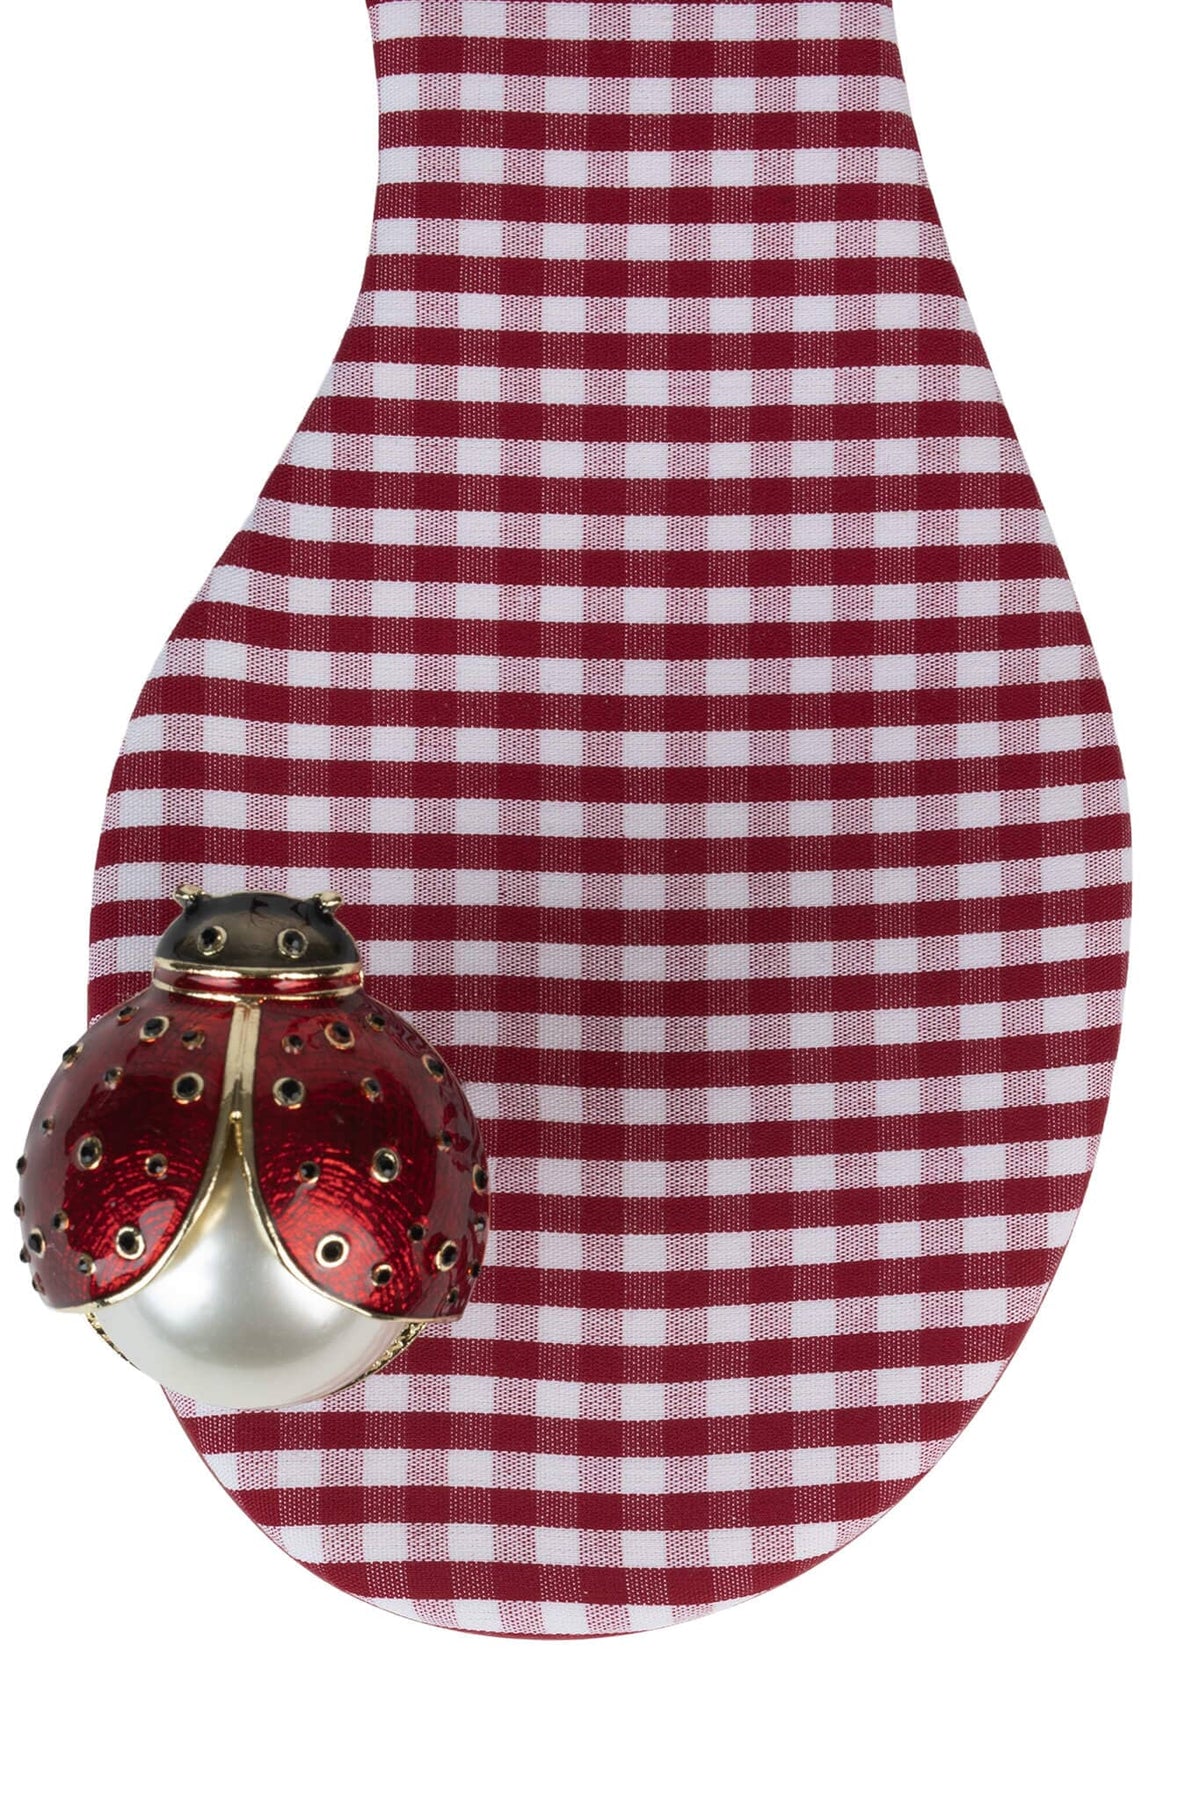 BEEANCA Jeffrey Campbell Sandals Red White Gingham Combo 